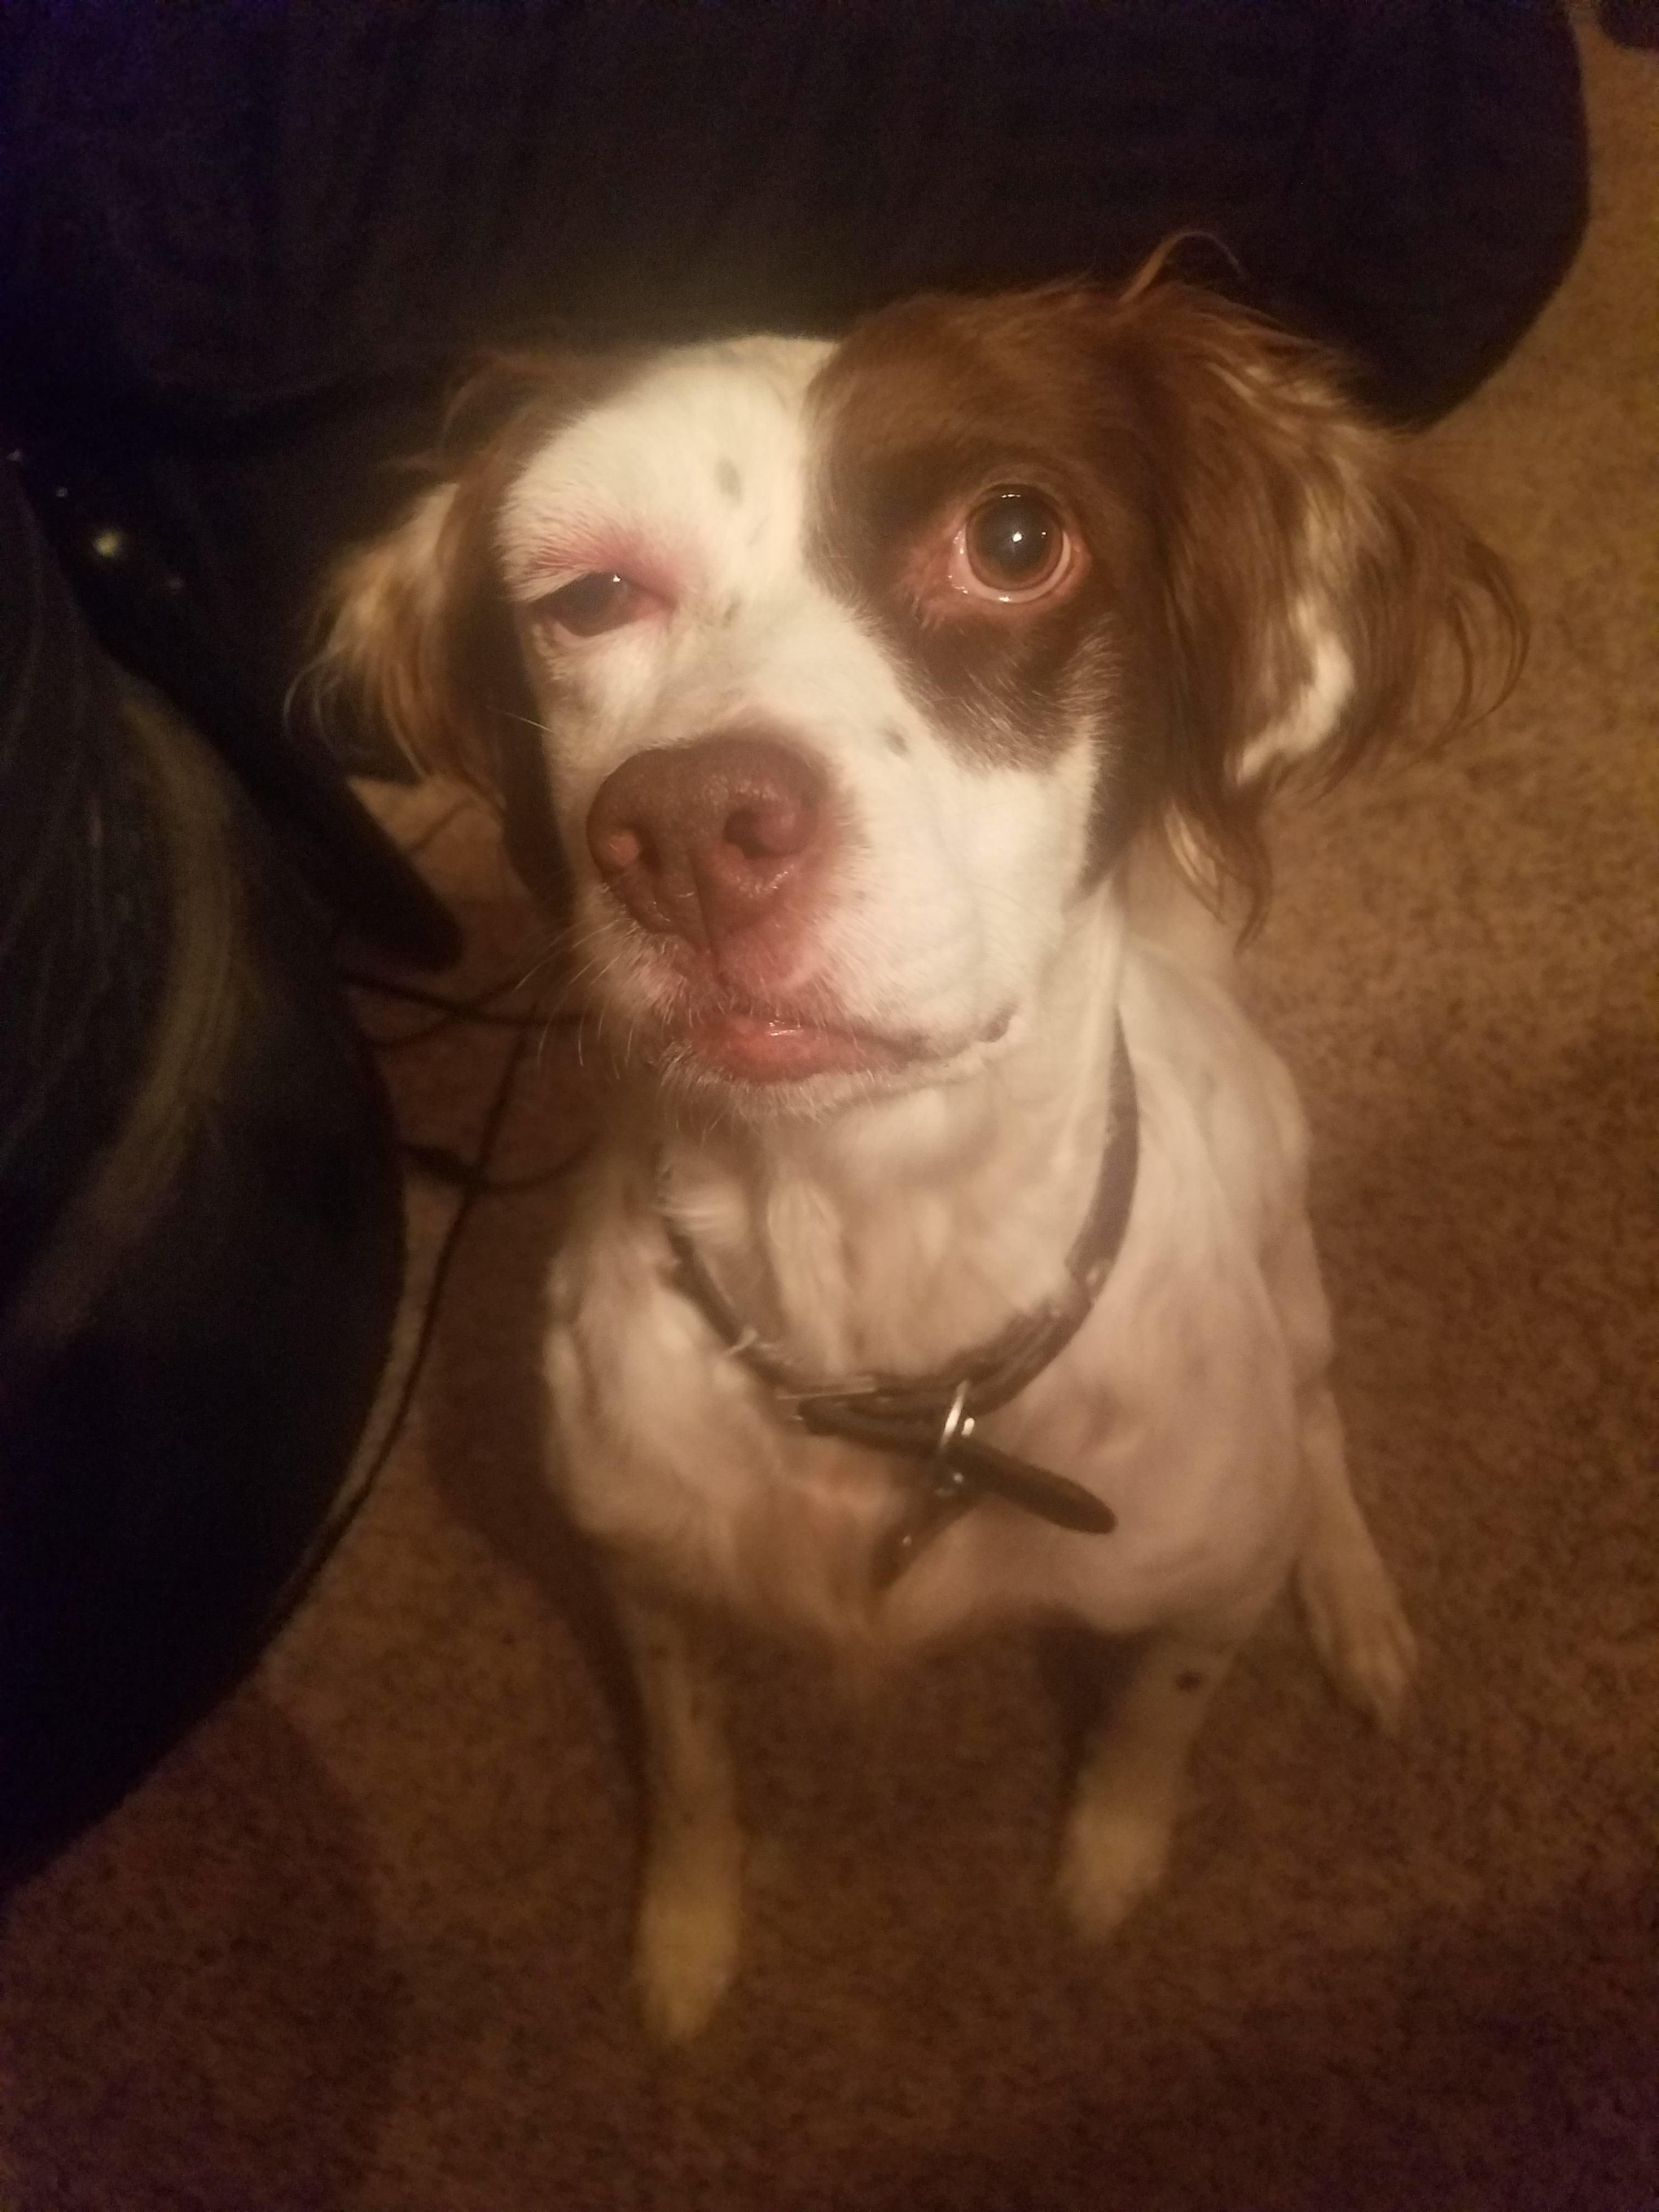 My dog got stung on her head. Now she has Forest Whitaker eye.